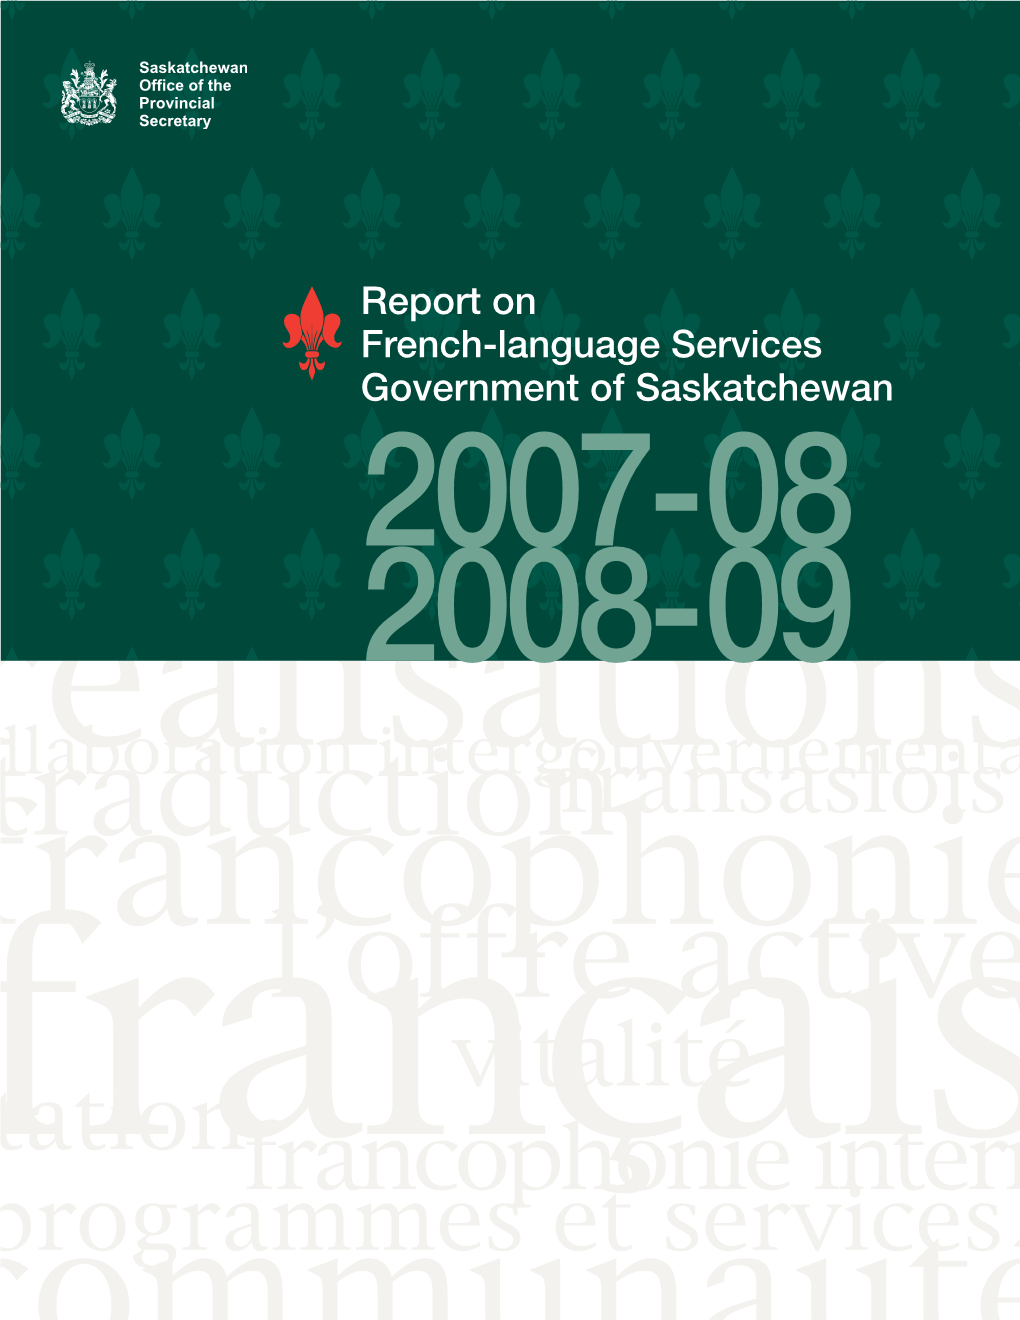 Francophonie Internationale Communautéprogrammes Et Services Report on French-Language Services – 2007-08 and 2008-09